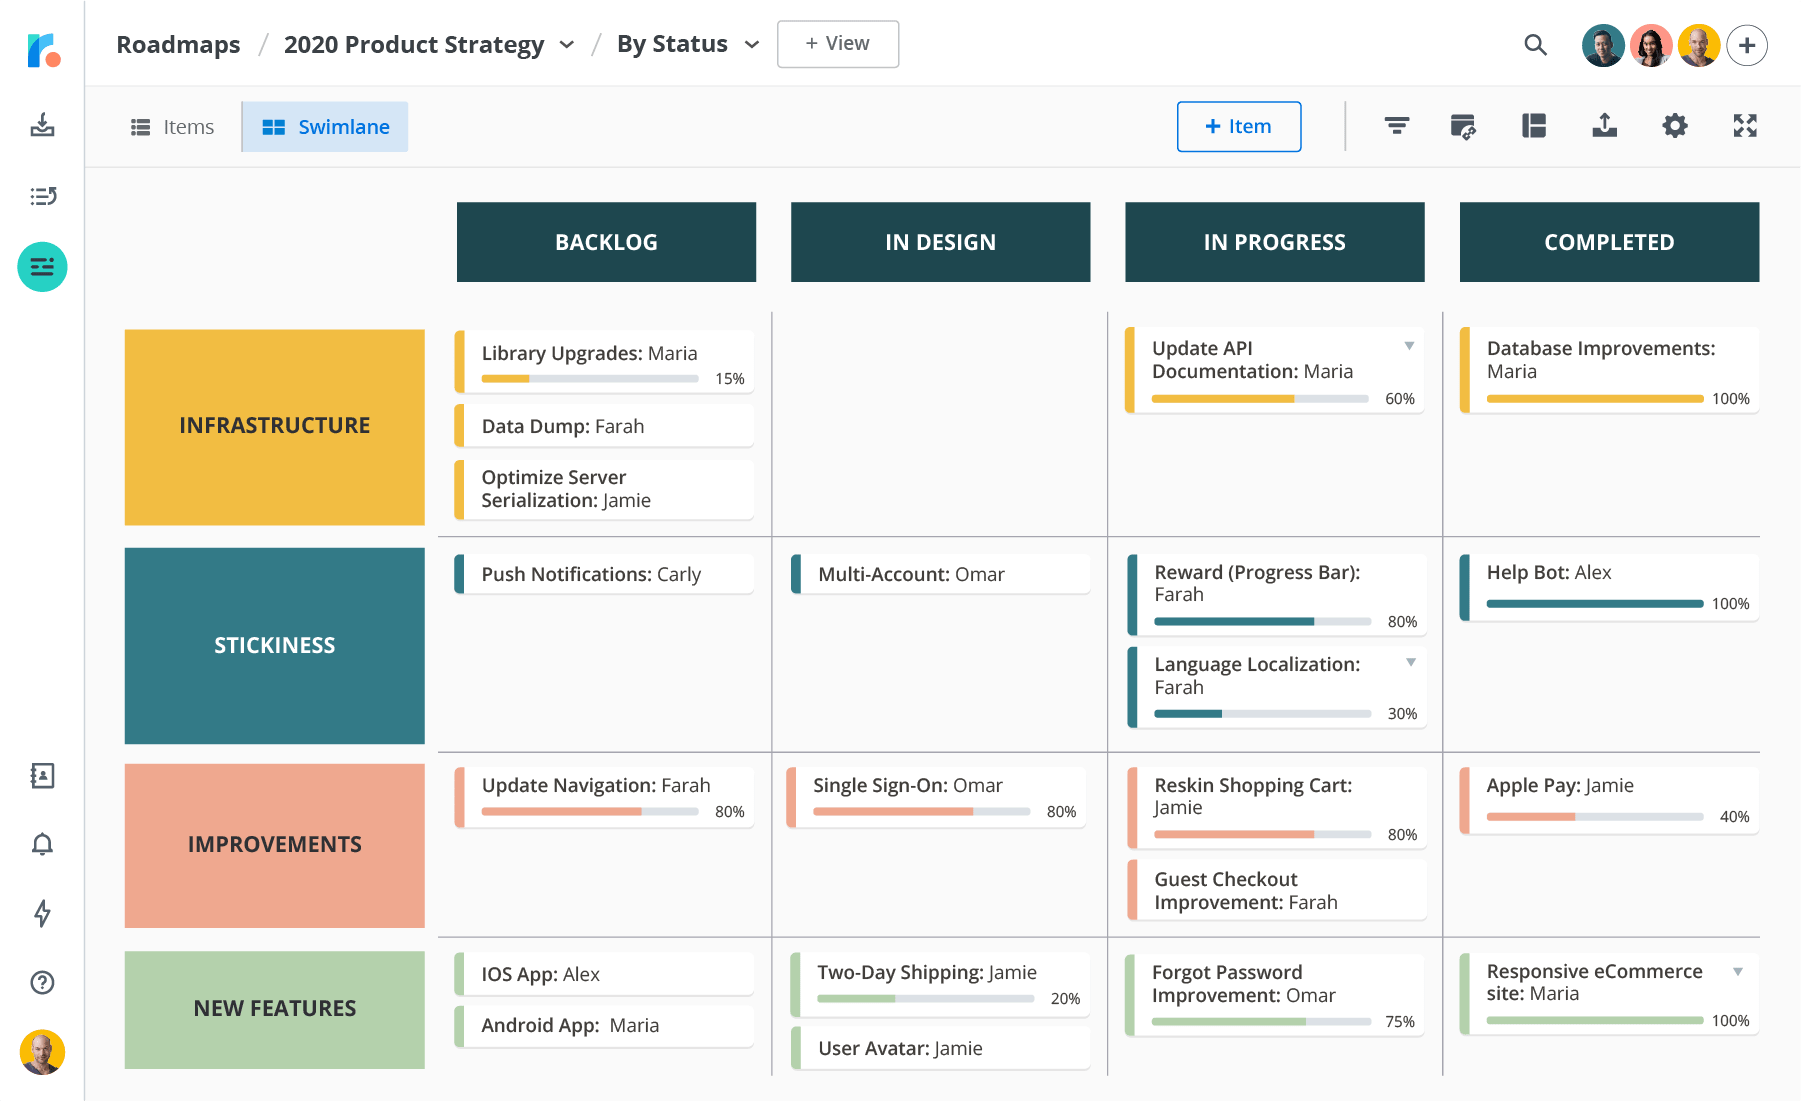 a product roadmap showing items by status of backlog, in design, in progress, or completed.